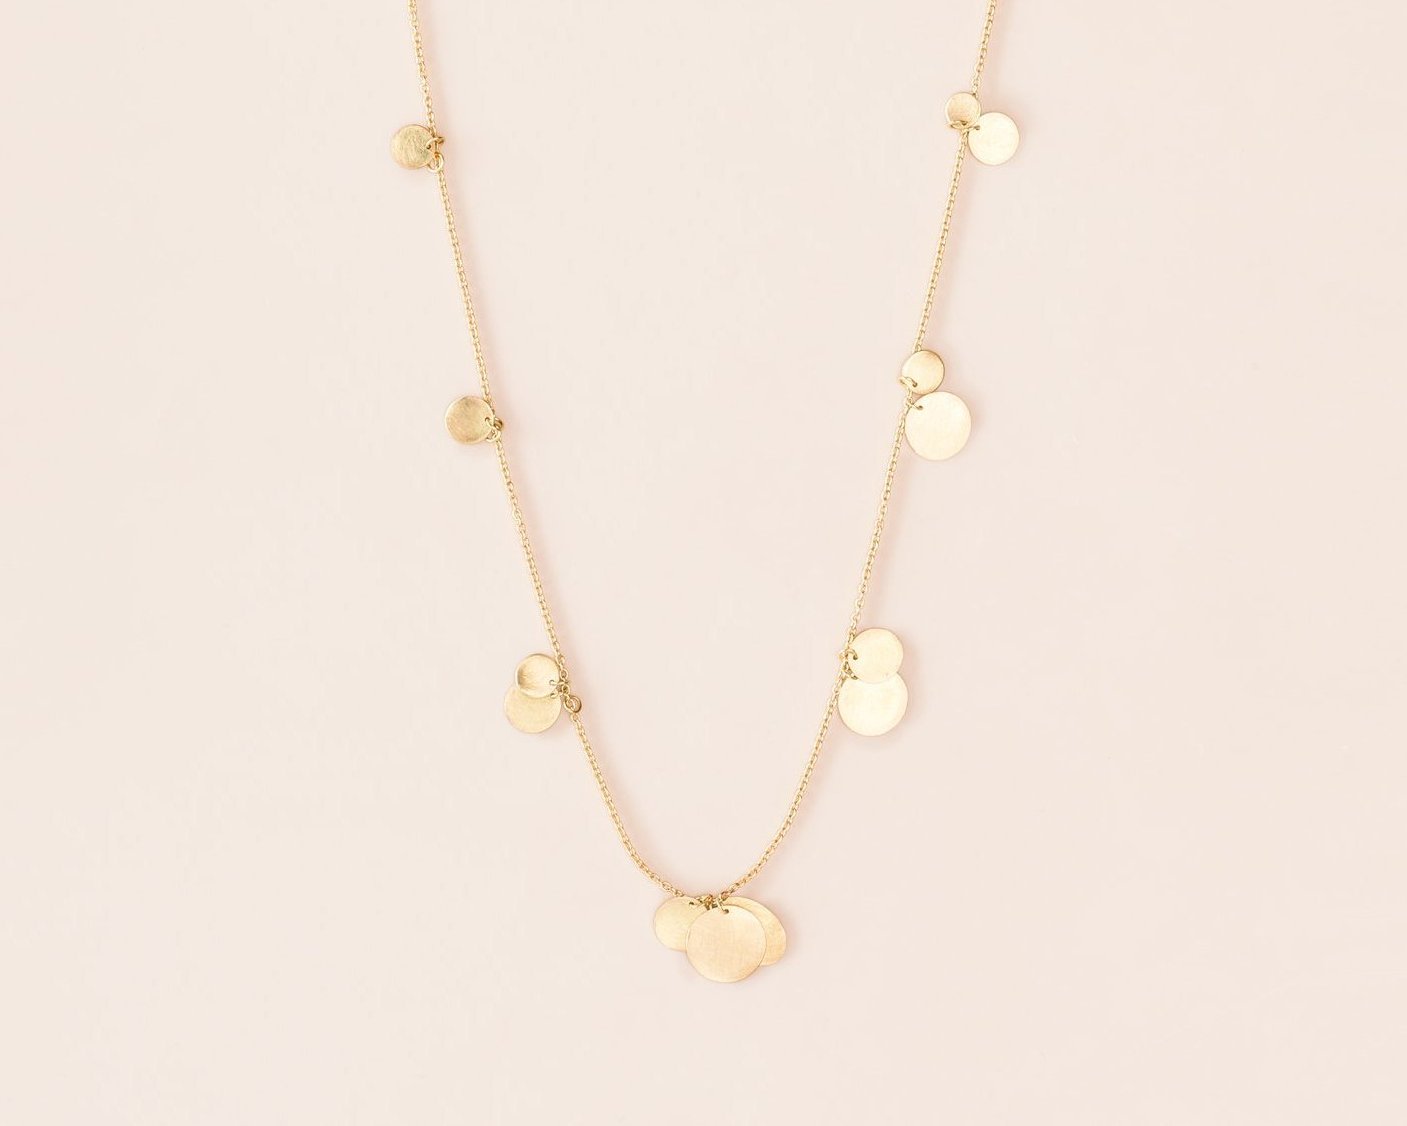 18KT yellow gold necklace with pendants - Piani